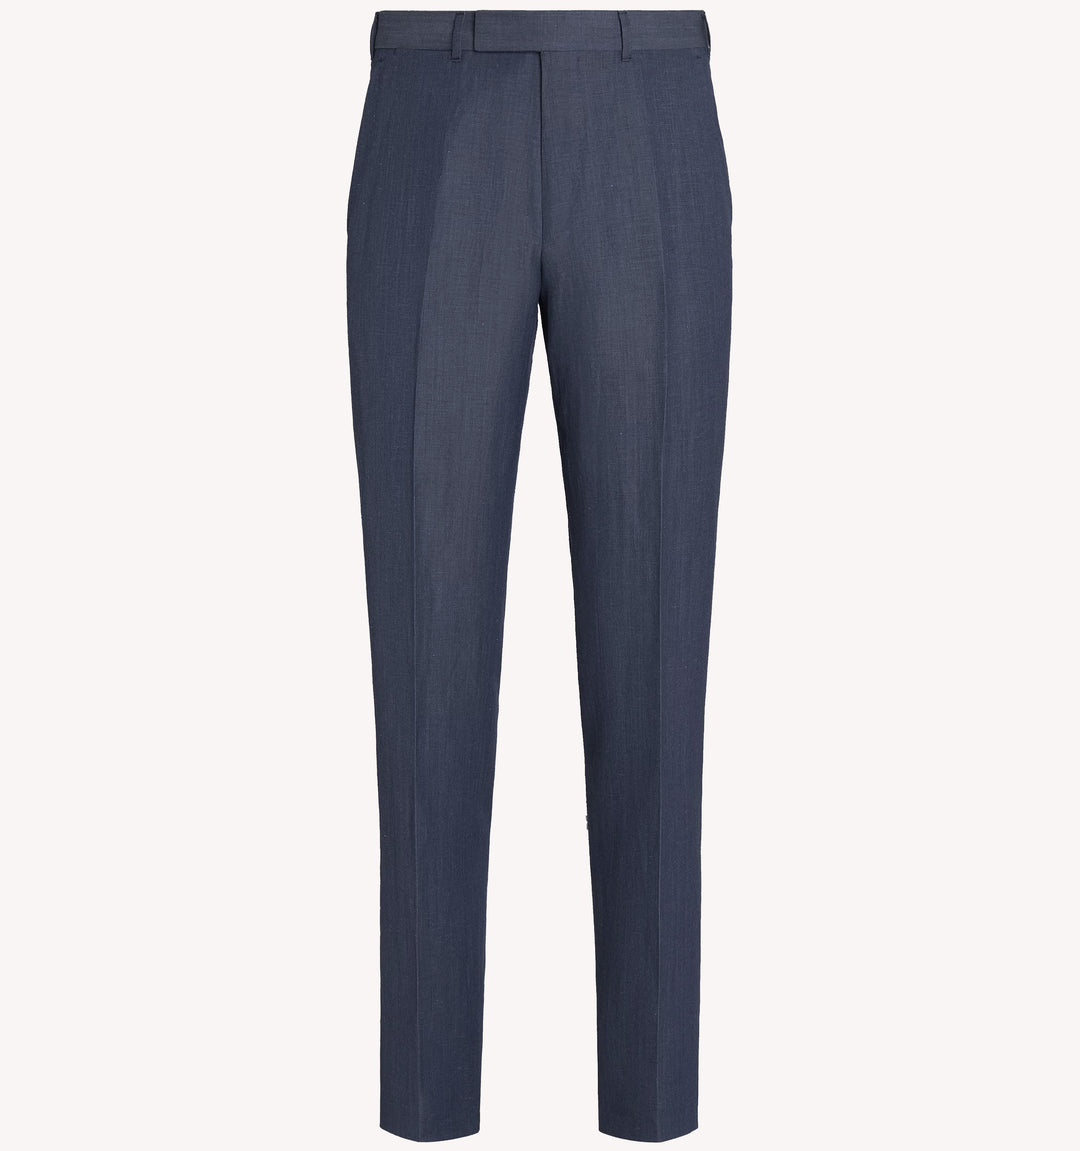 Zegna Dress Trousers in Navy